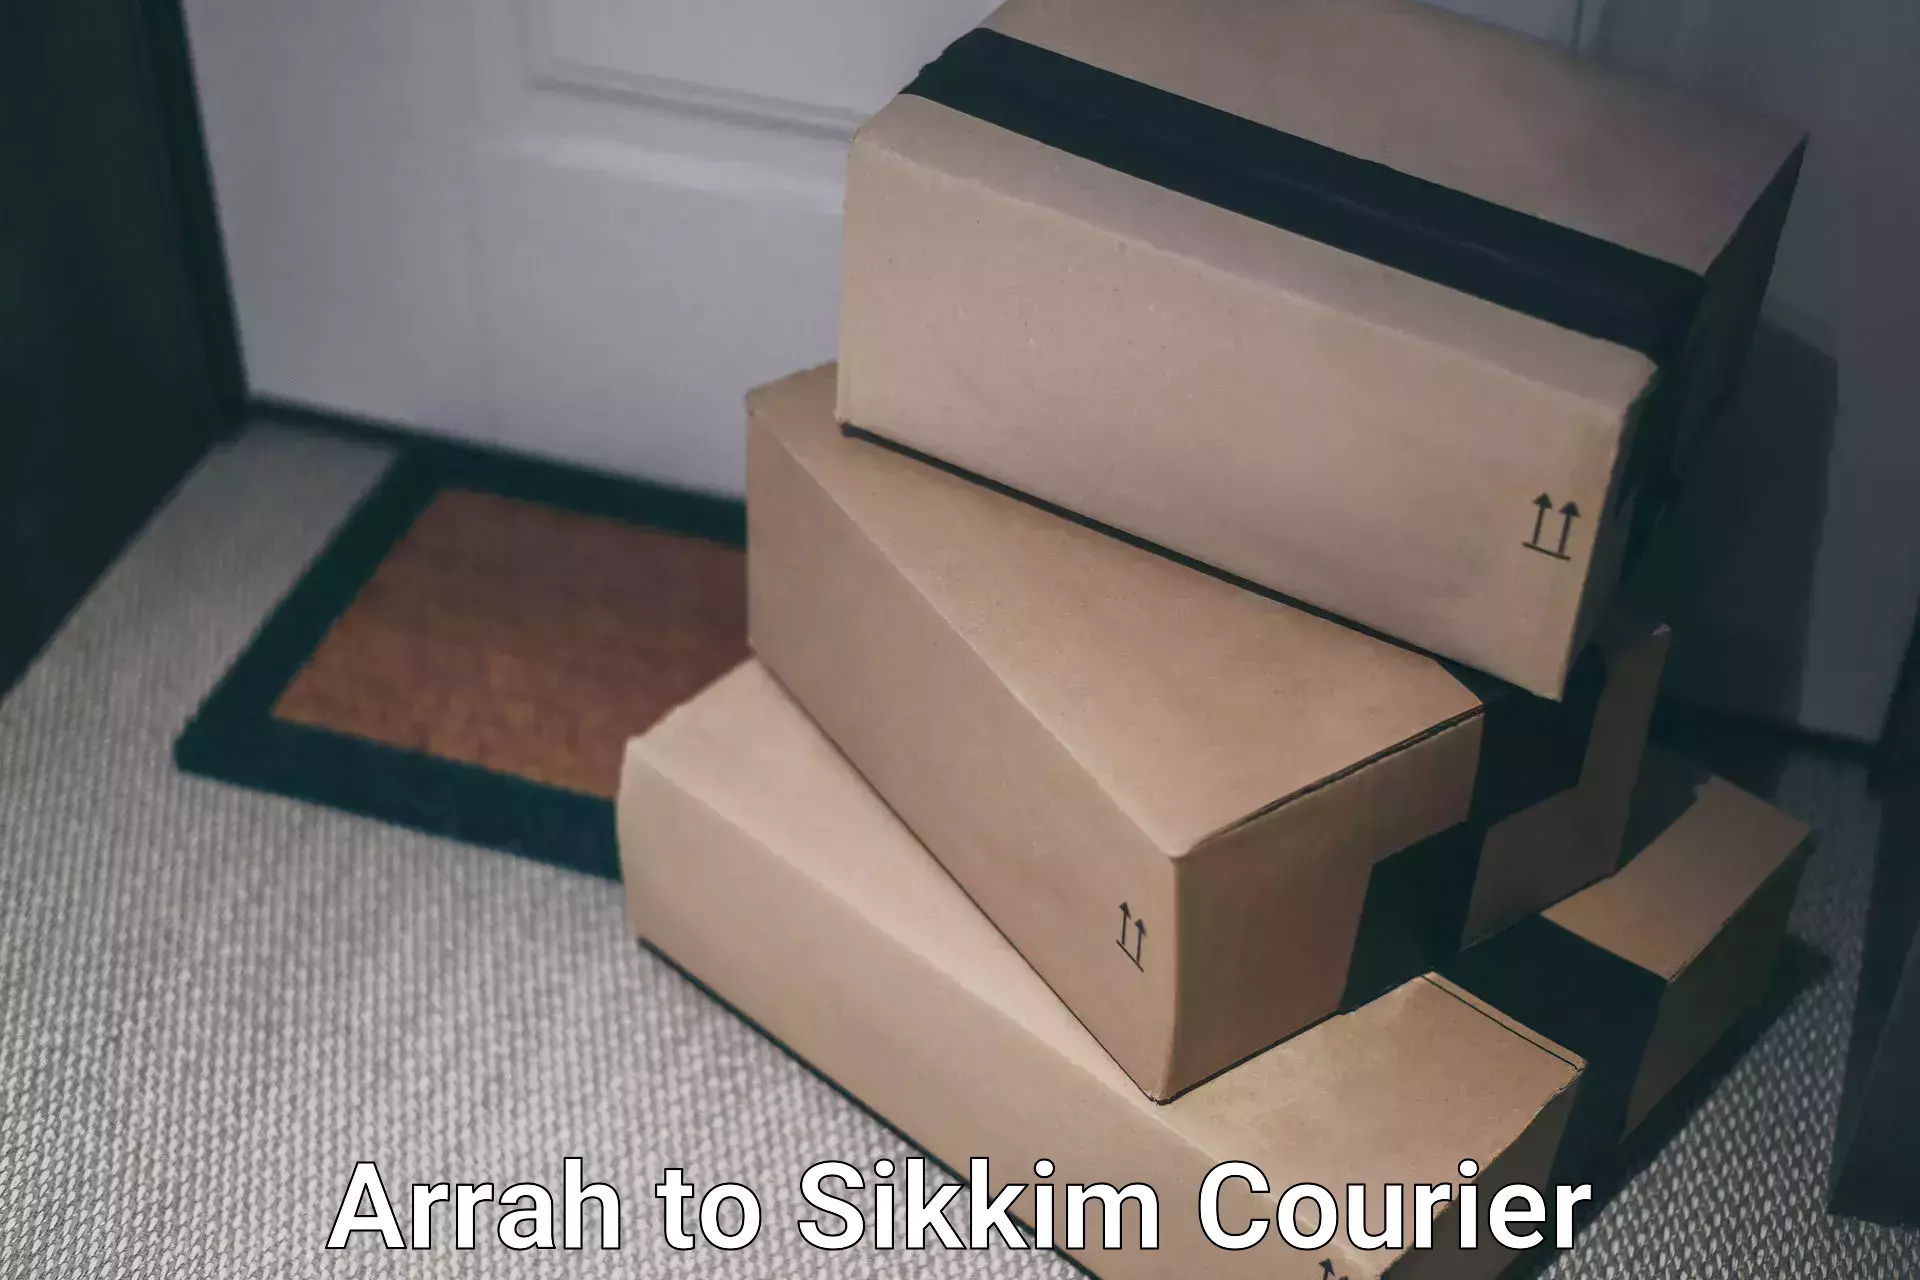 Discounted shipping Arrah to Pelling